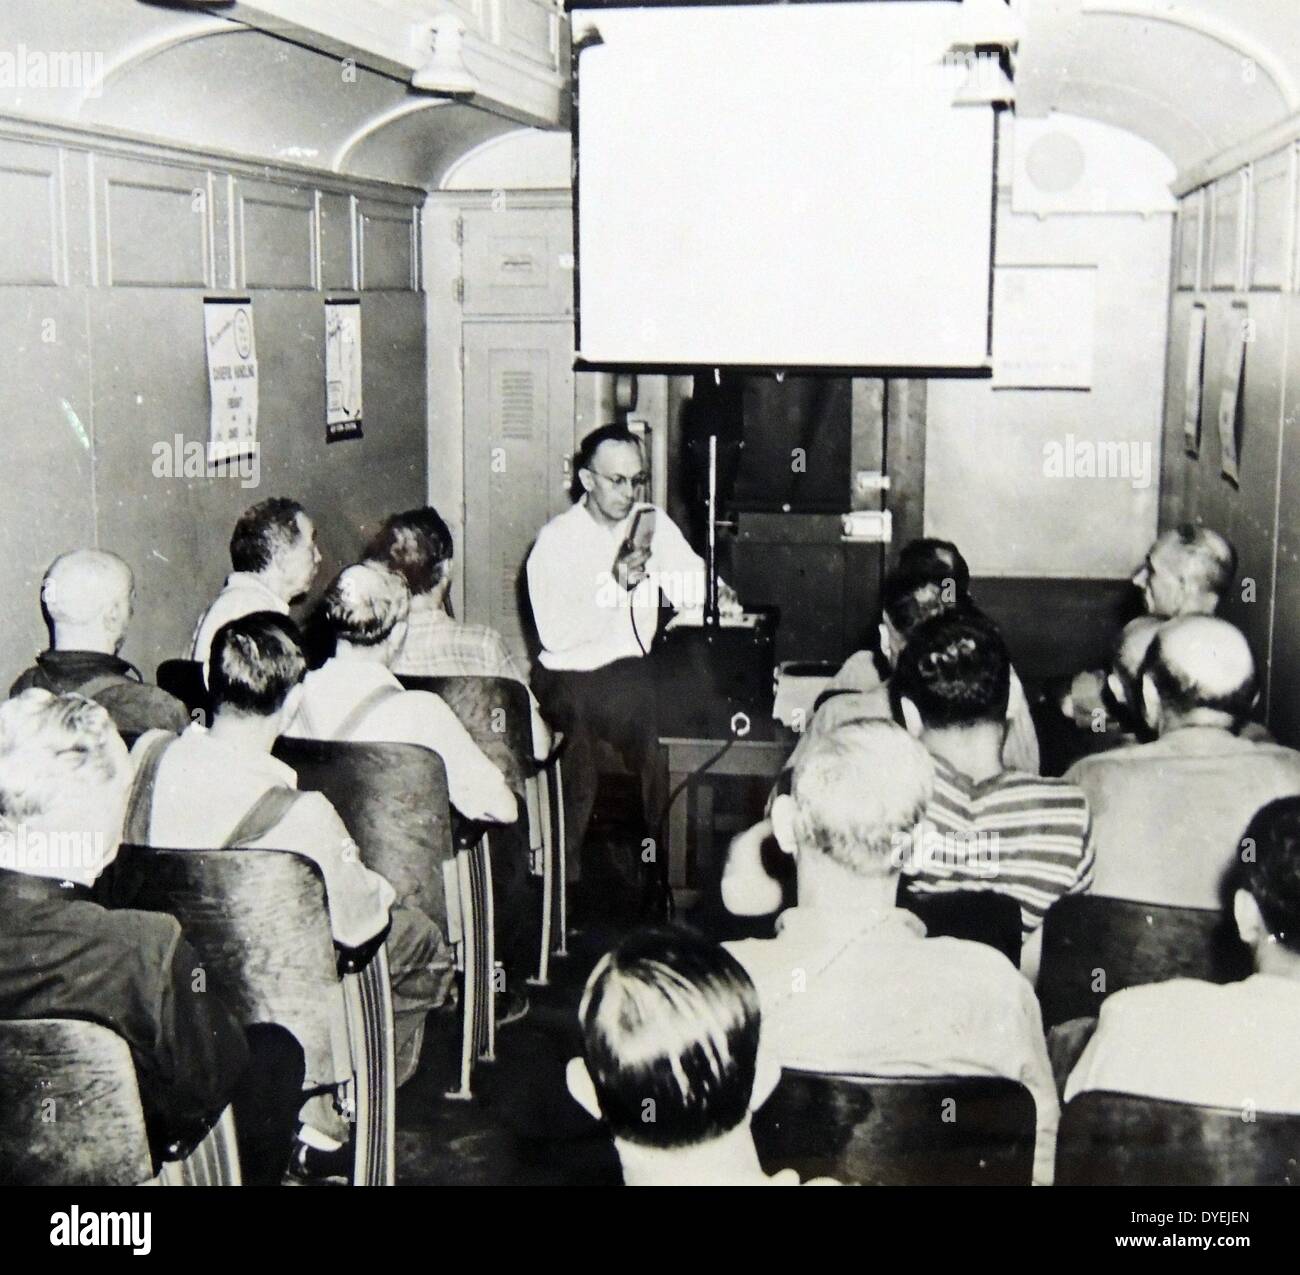 Education campaign conducted on a specially converted train carriage in New York to promote literacy for adults 1950 Stock Photo